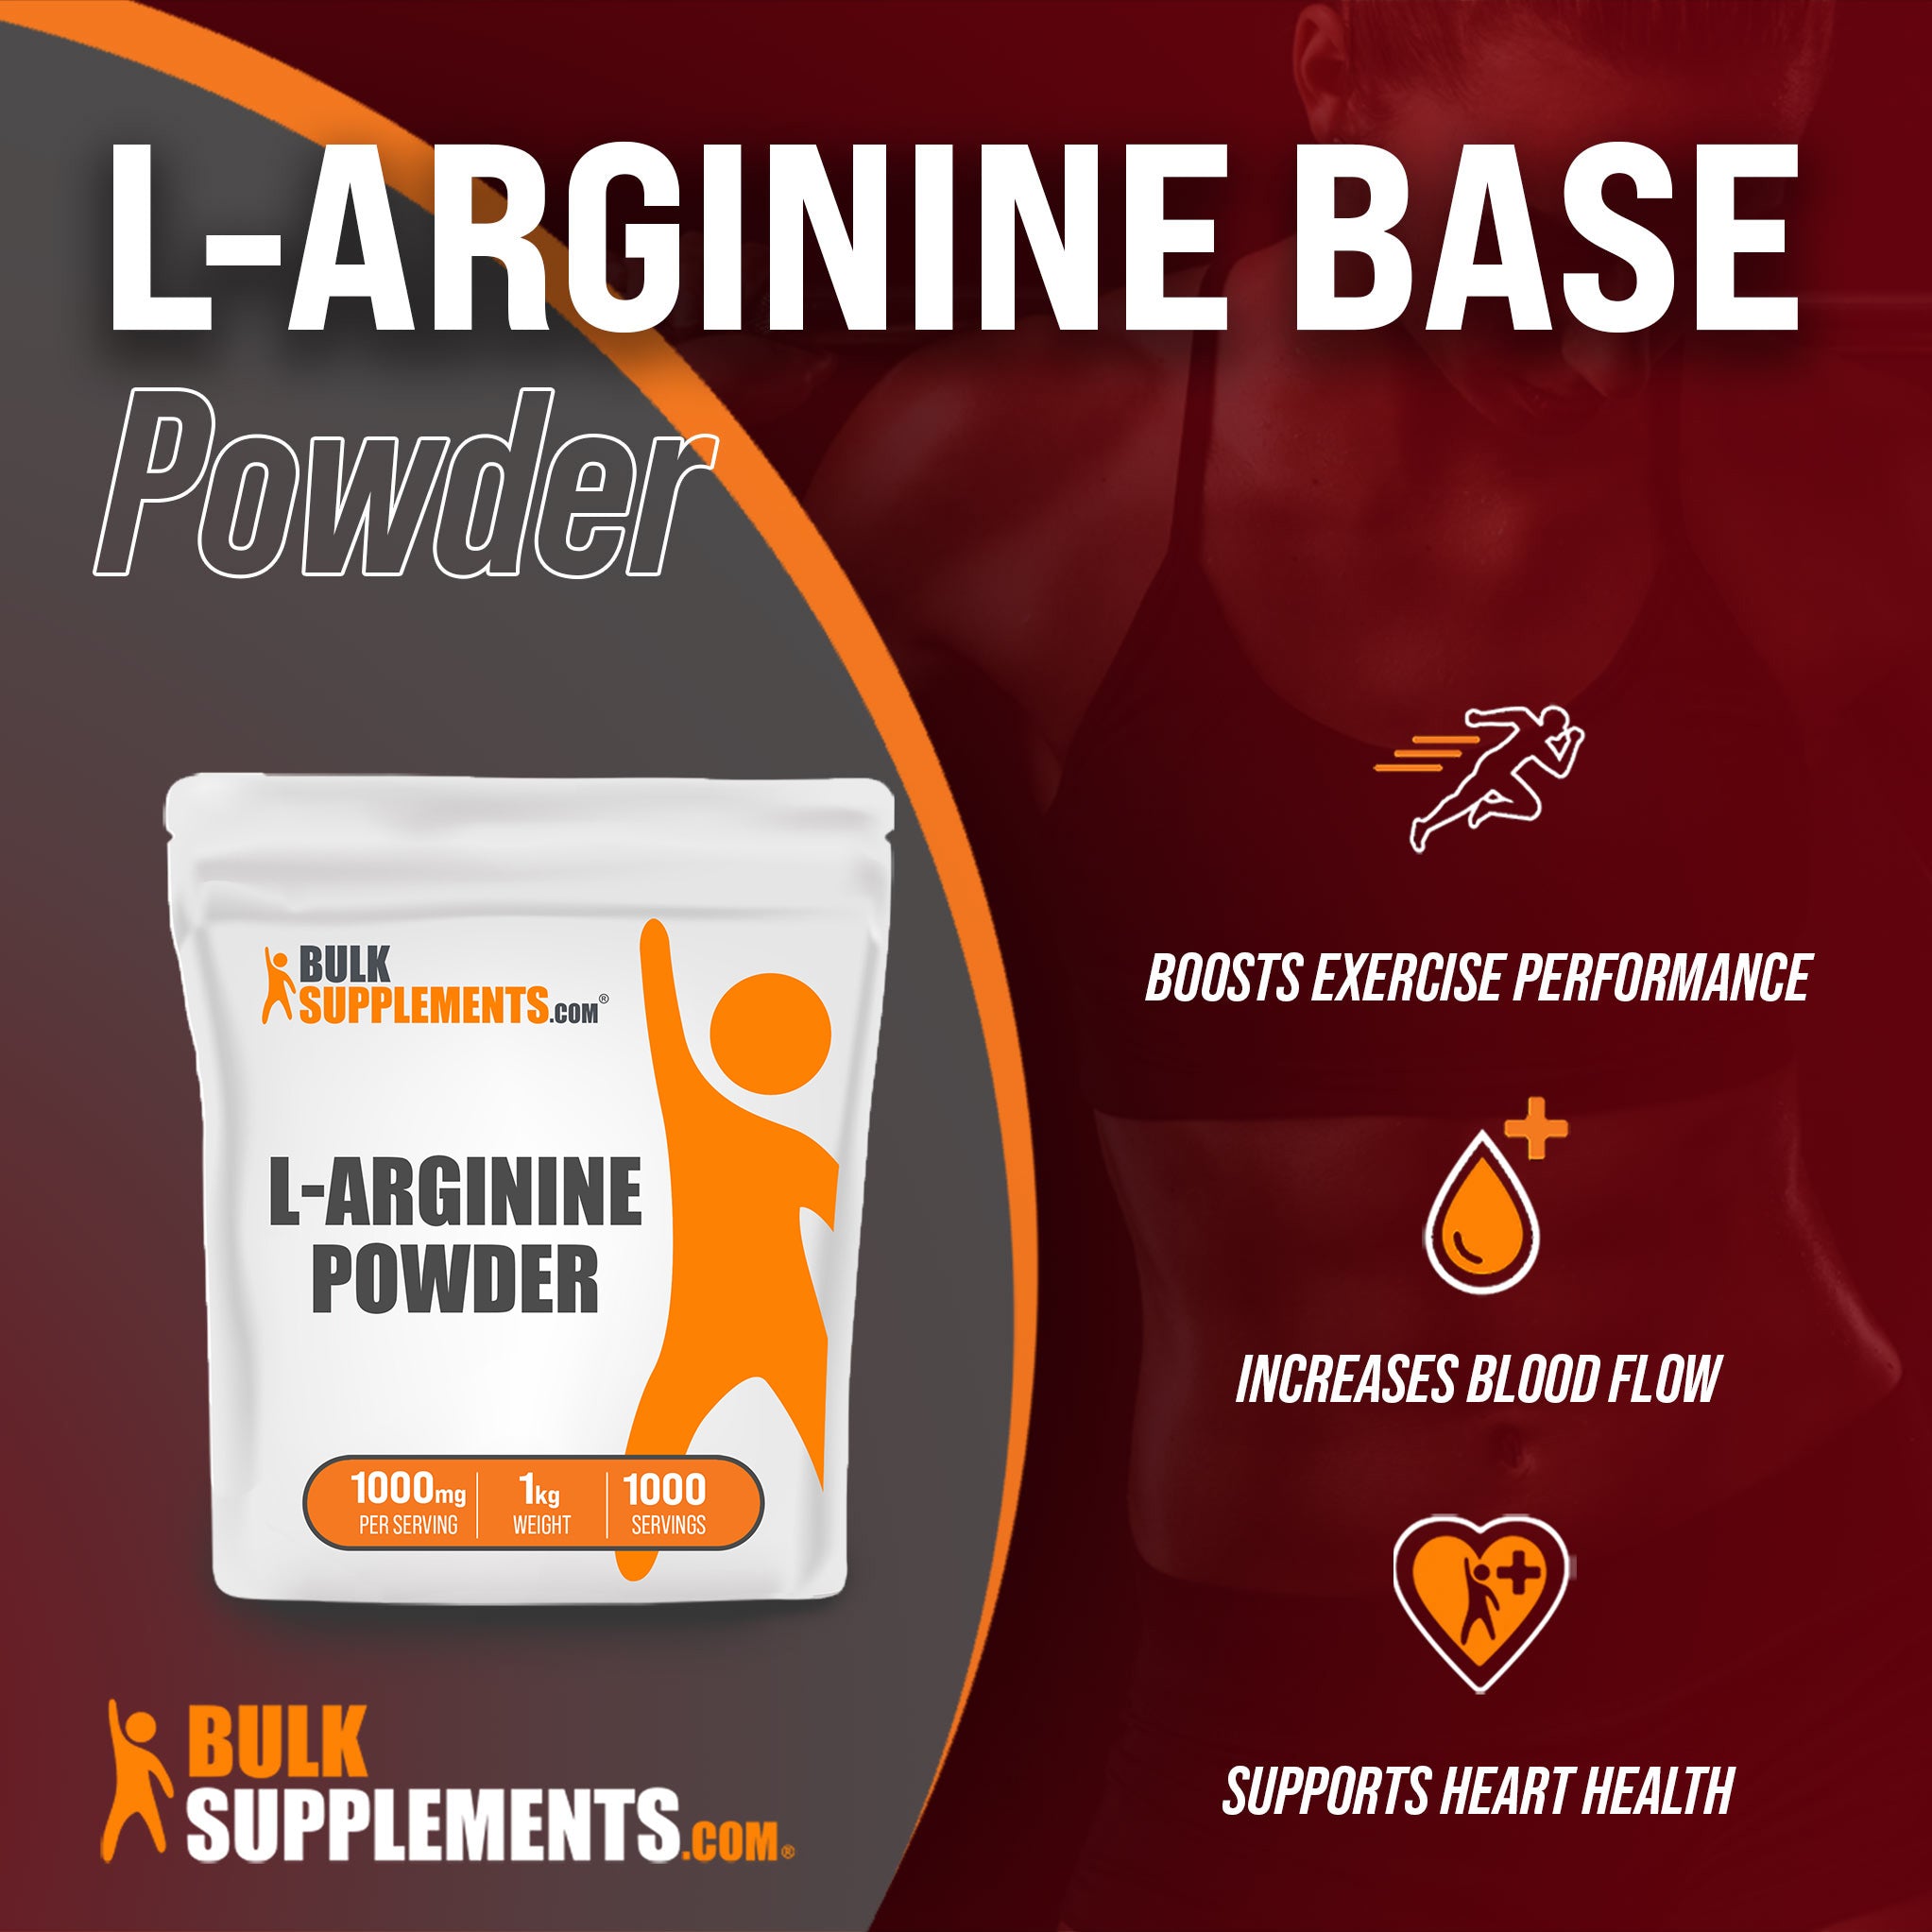 Benefits of L-Arginine Base: boosts exercise performance, increases blood flow, supports heart health